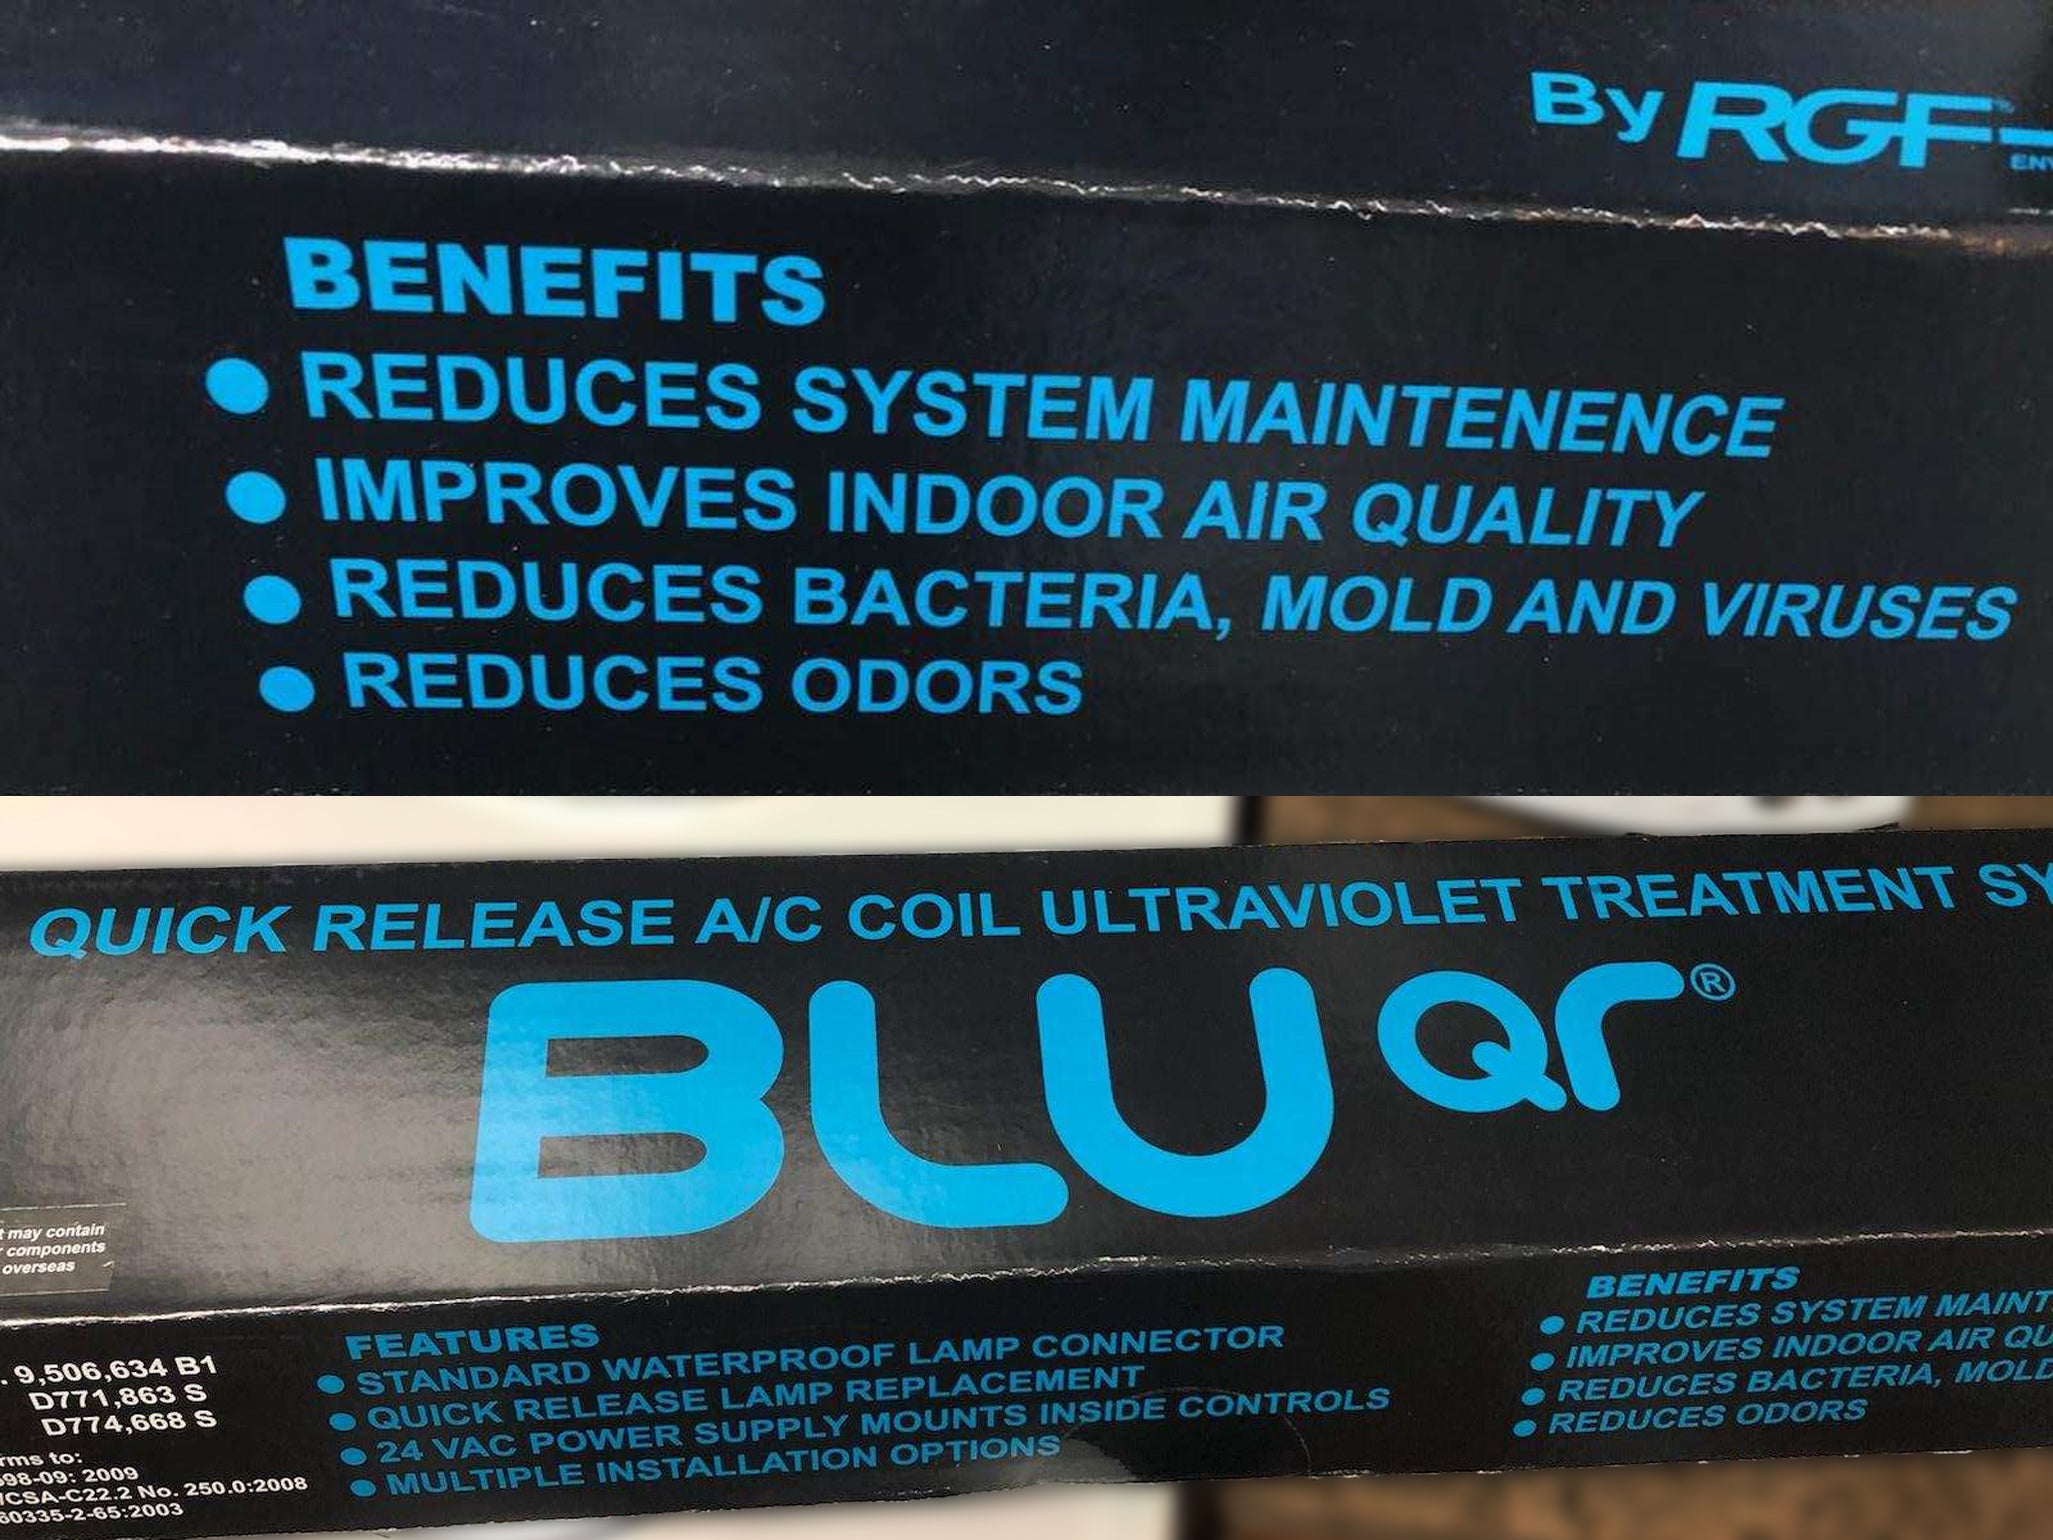 BLU QR UV treatment system installed in the A/C